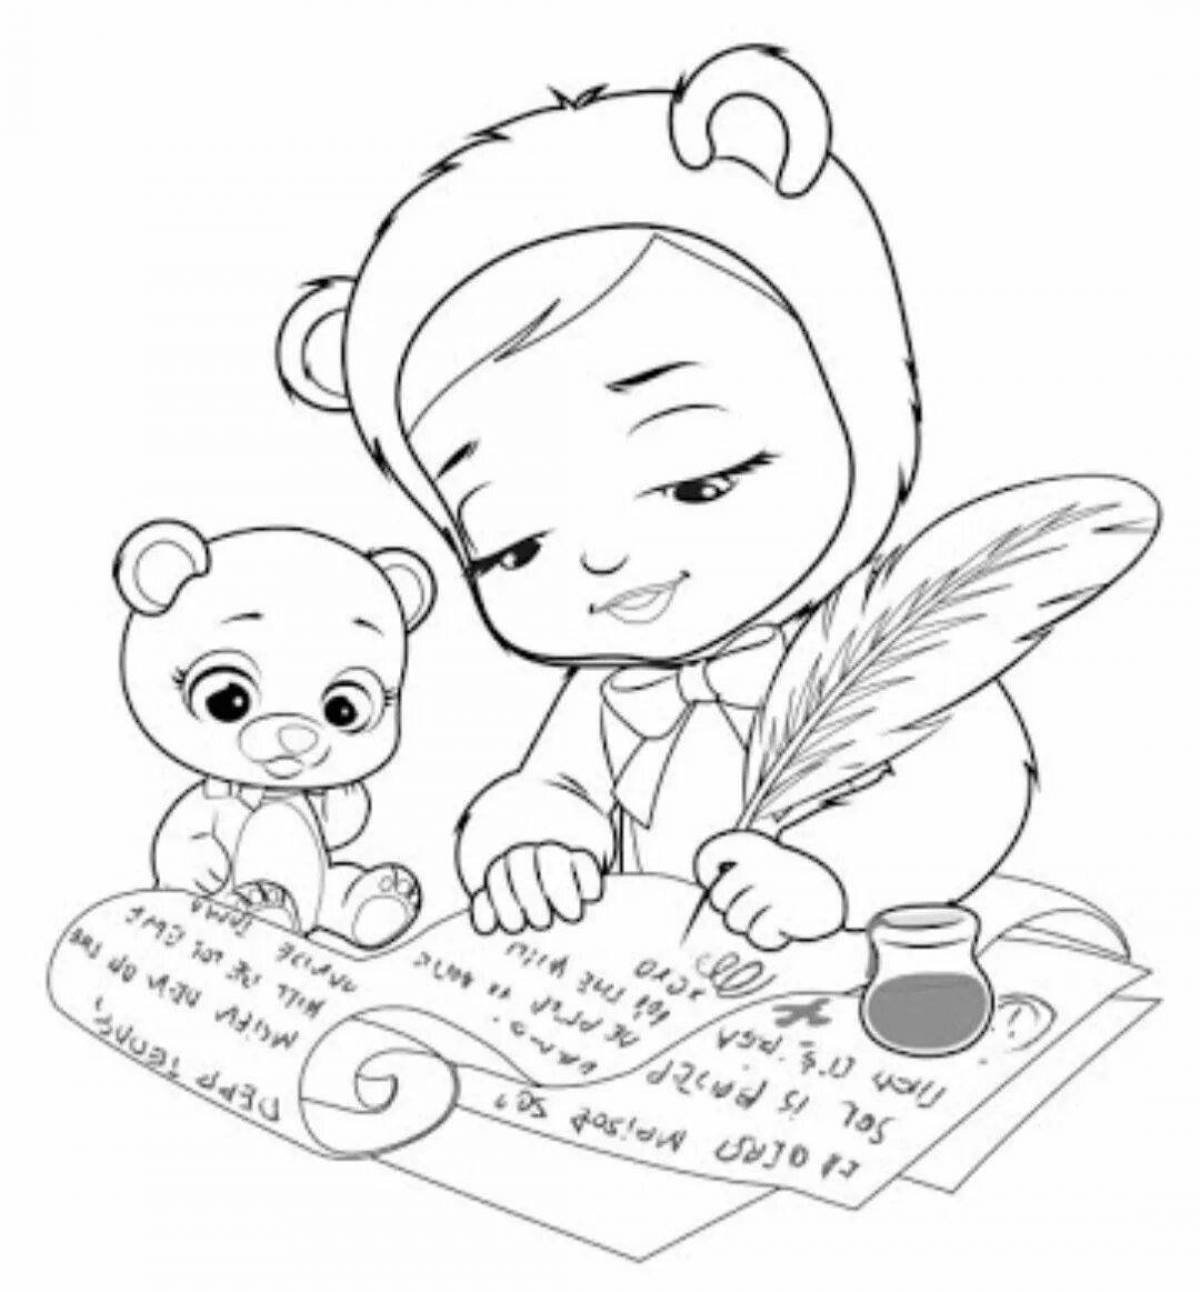 Playful crybaby coloring book